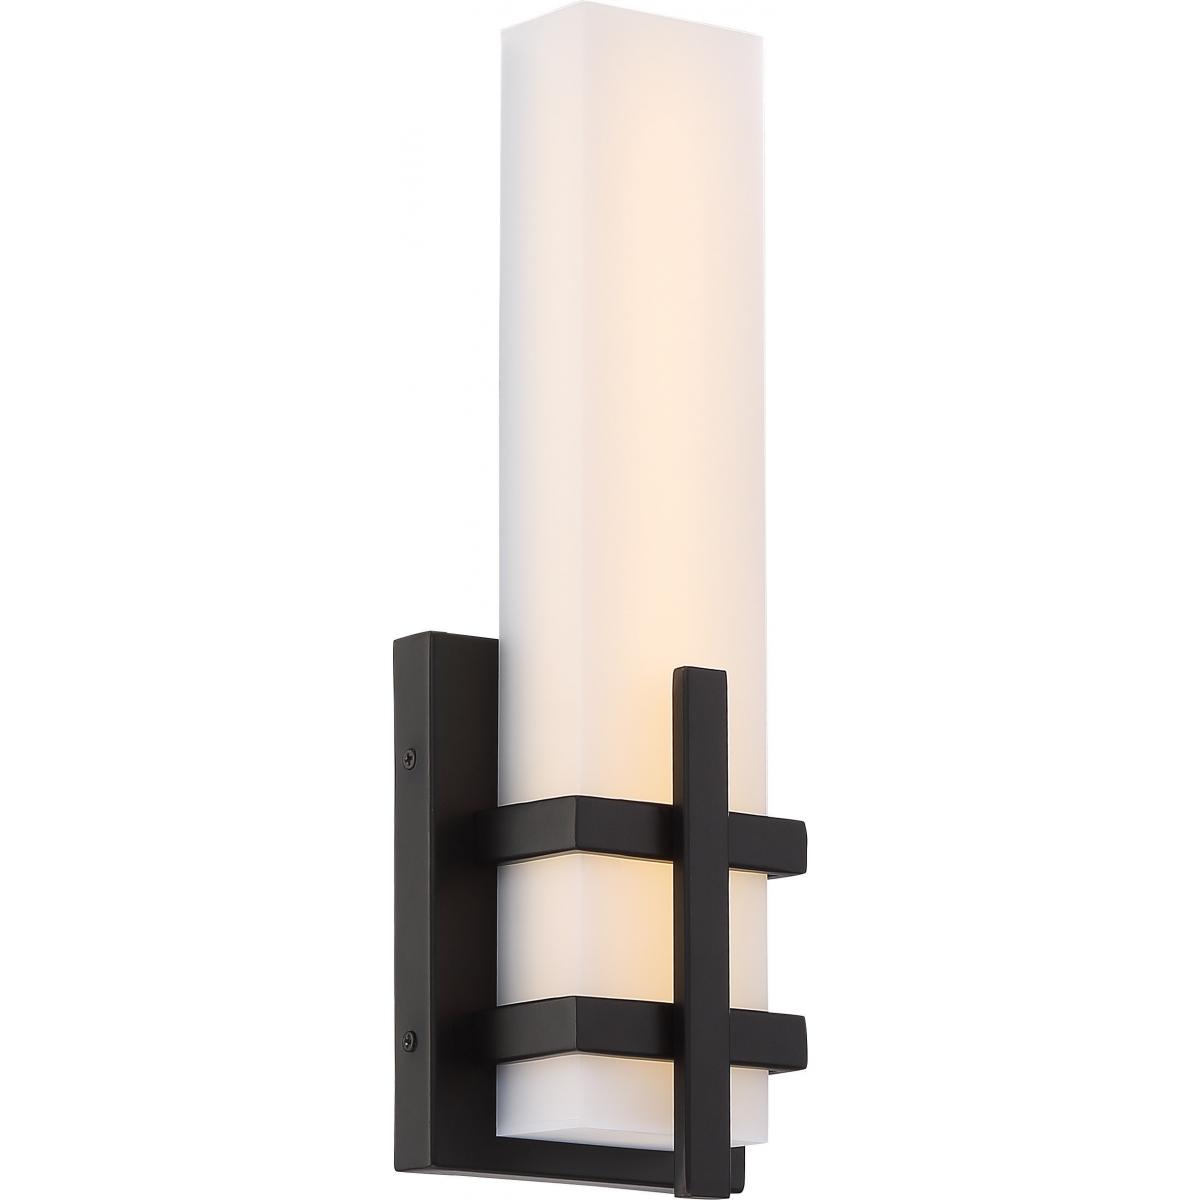 62-873 GRILL SINGLE LED WALL SCONCE